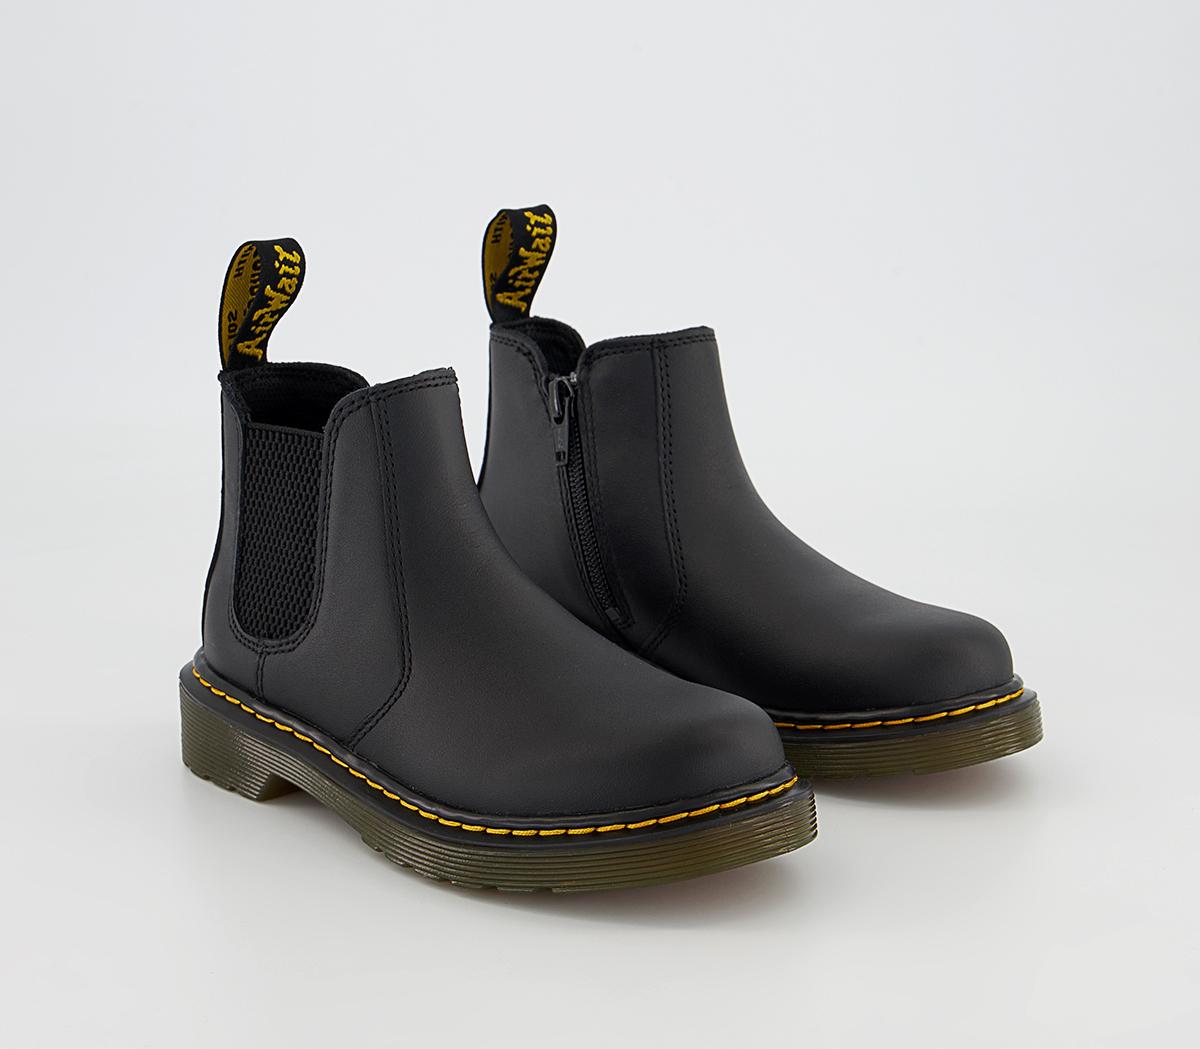 Dr. Martens 2976 Junior Chelsea Boots Black, 10 Youth